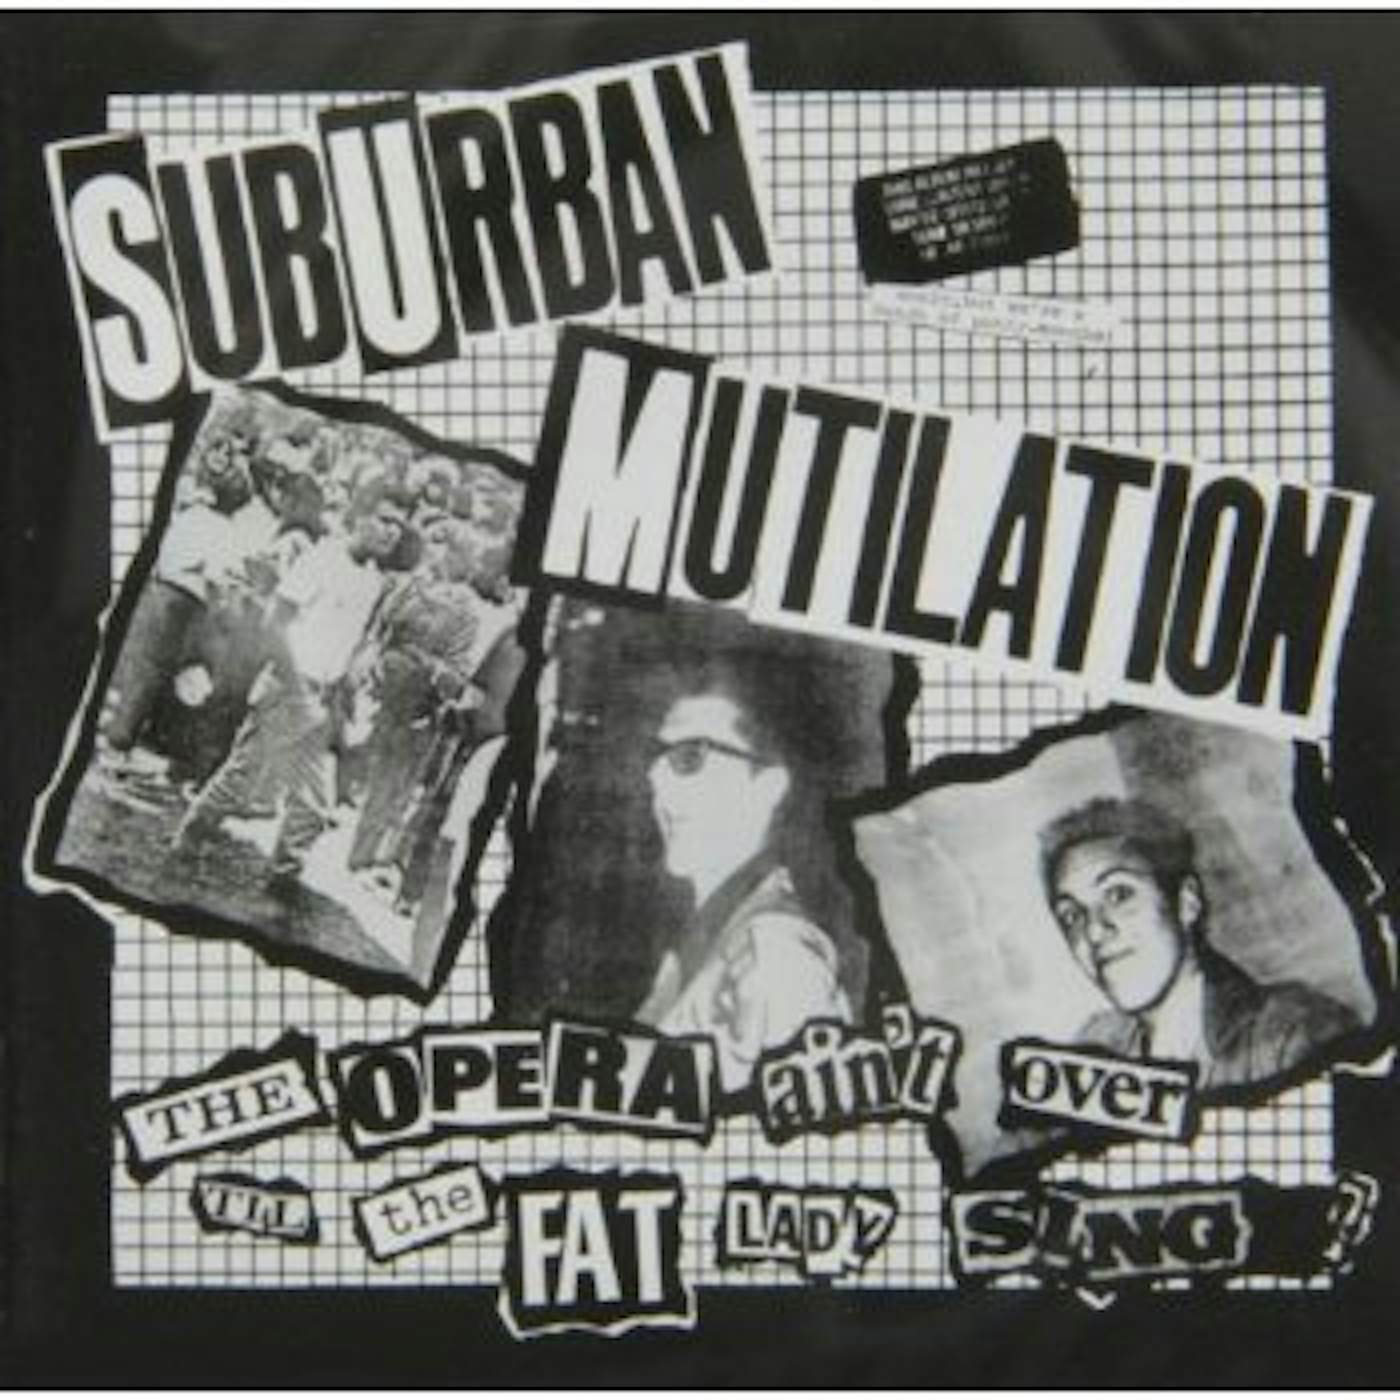 Suburban Mutilation OPERA AIN'T OVER TILL THE FAT LADY SINGS CD